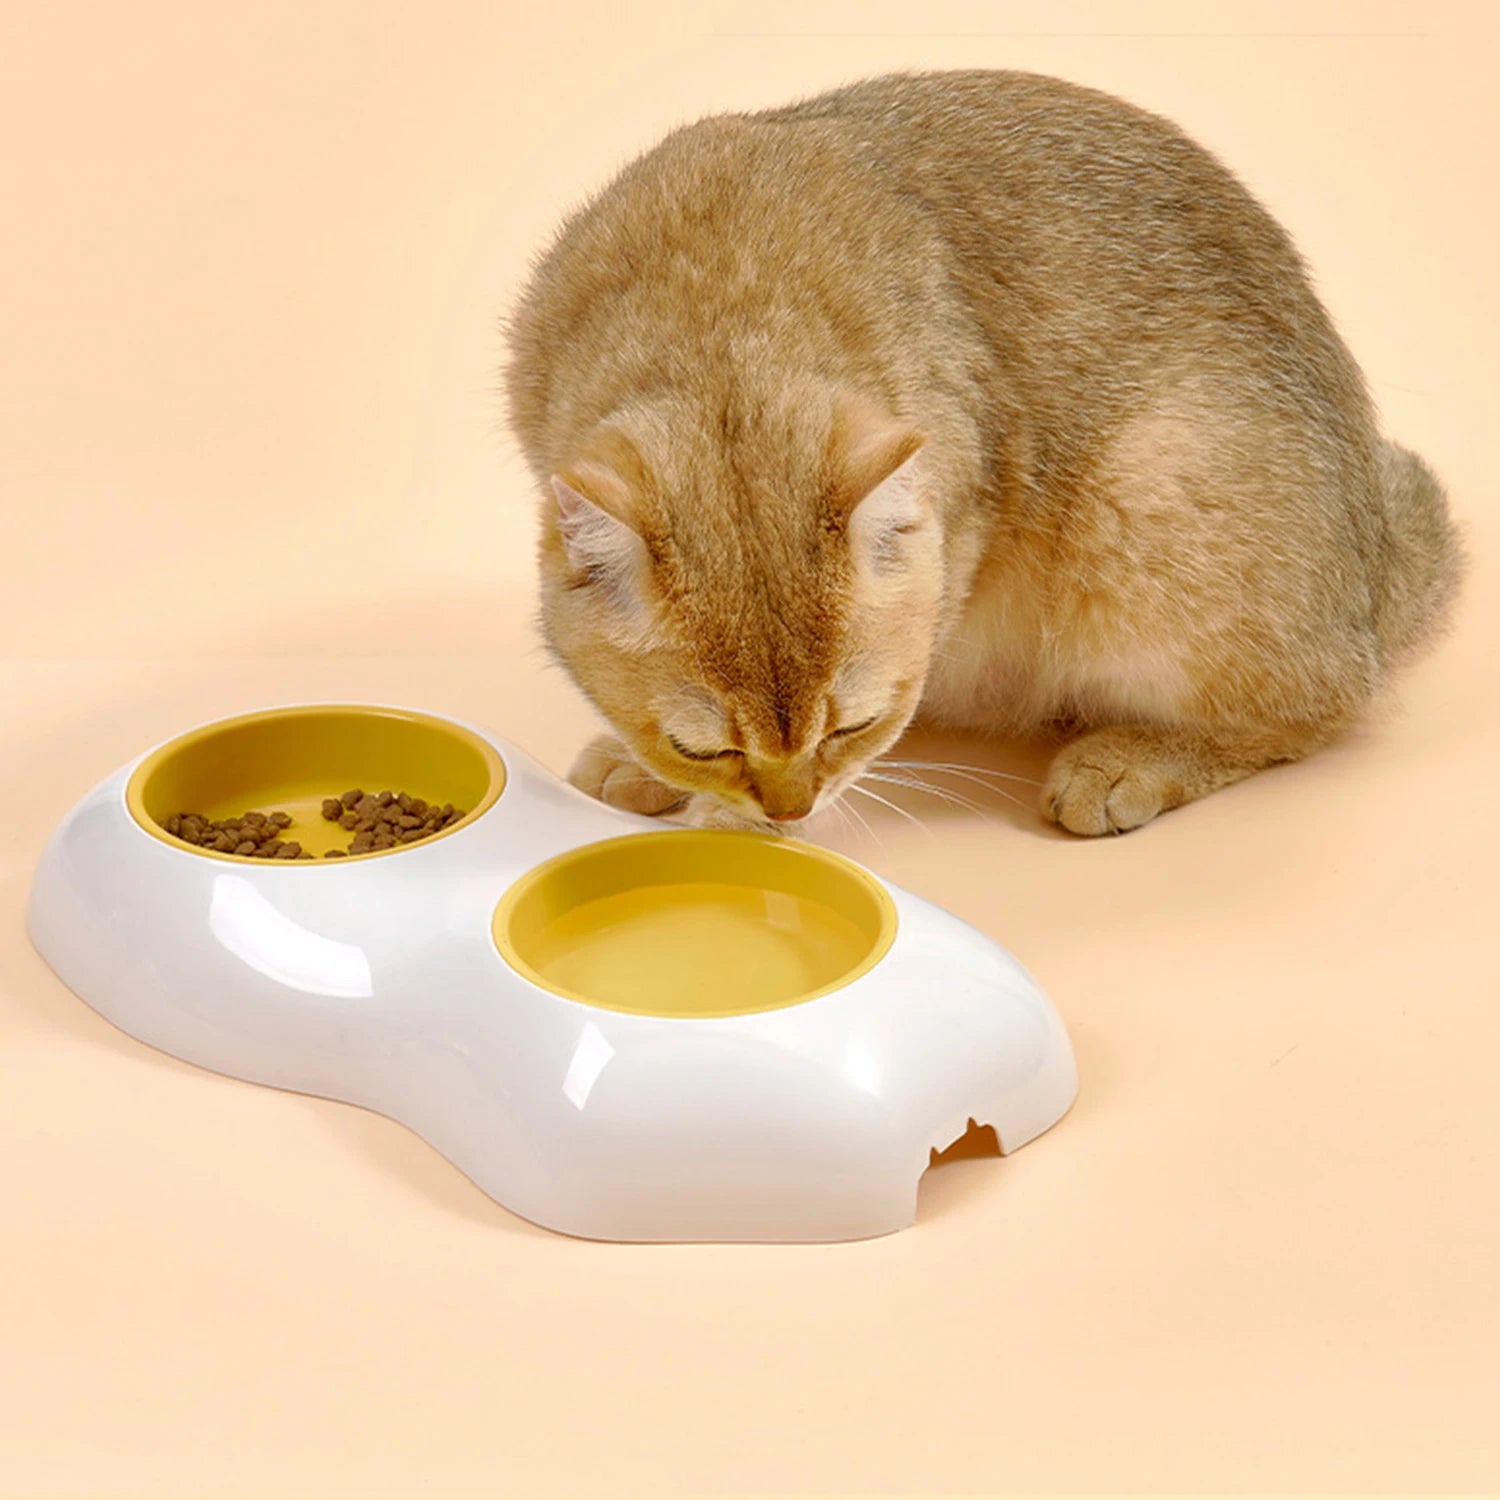 egg-shaped pet drinking water and food detachable bowl with anti-overturning feature4